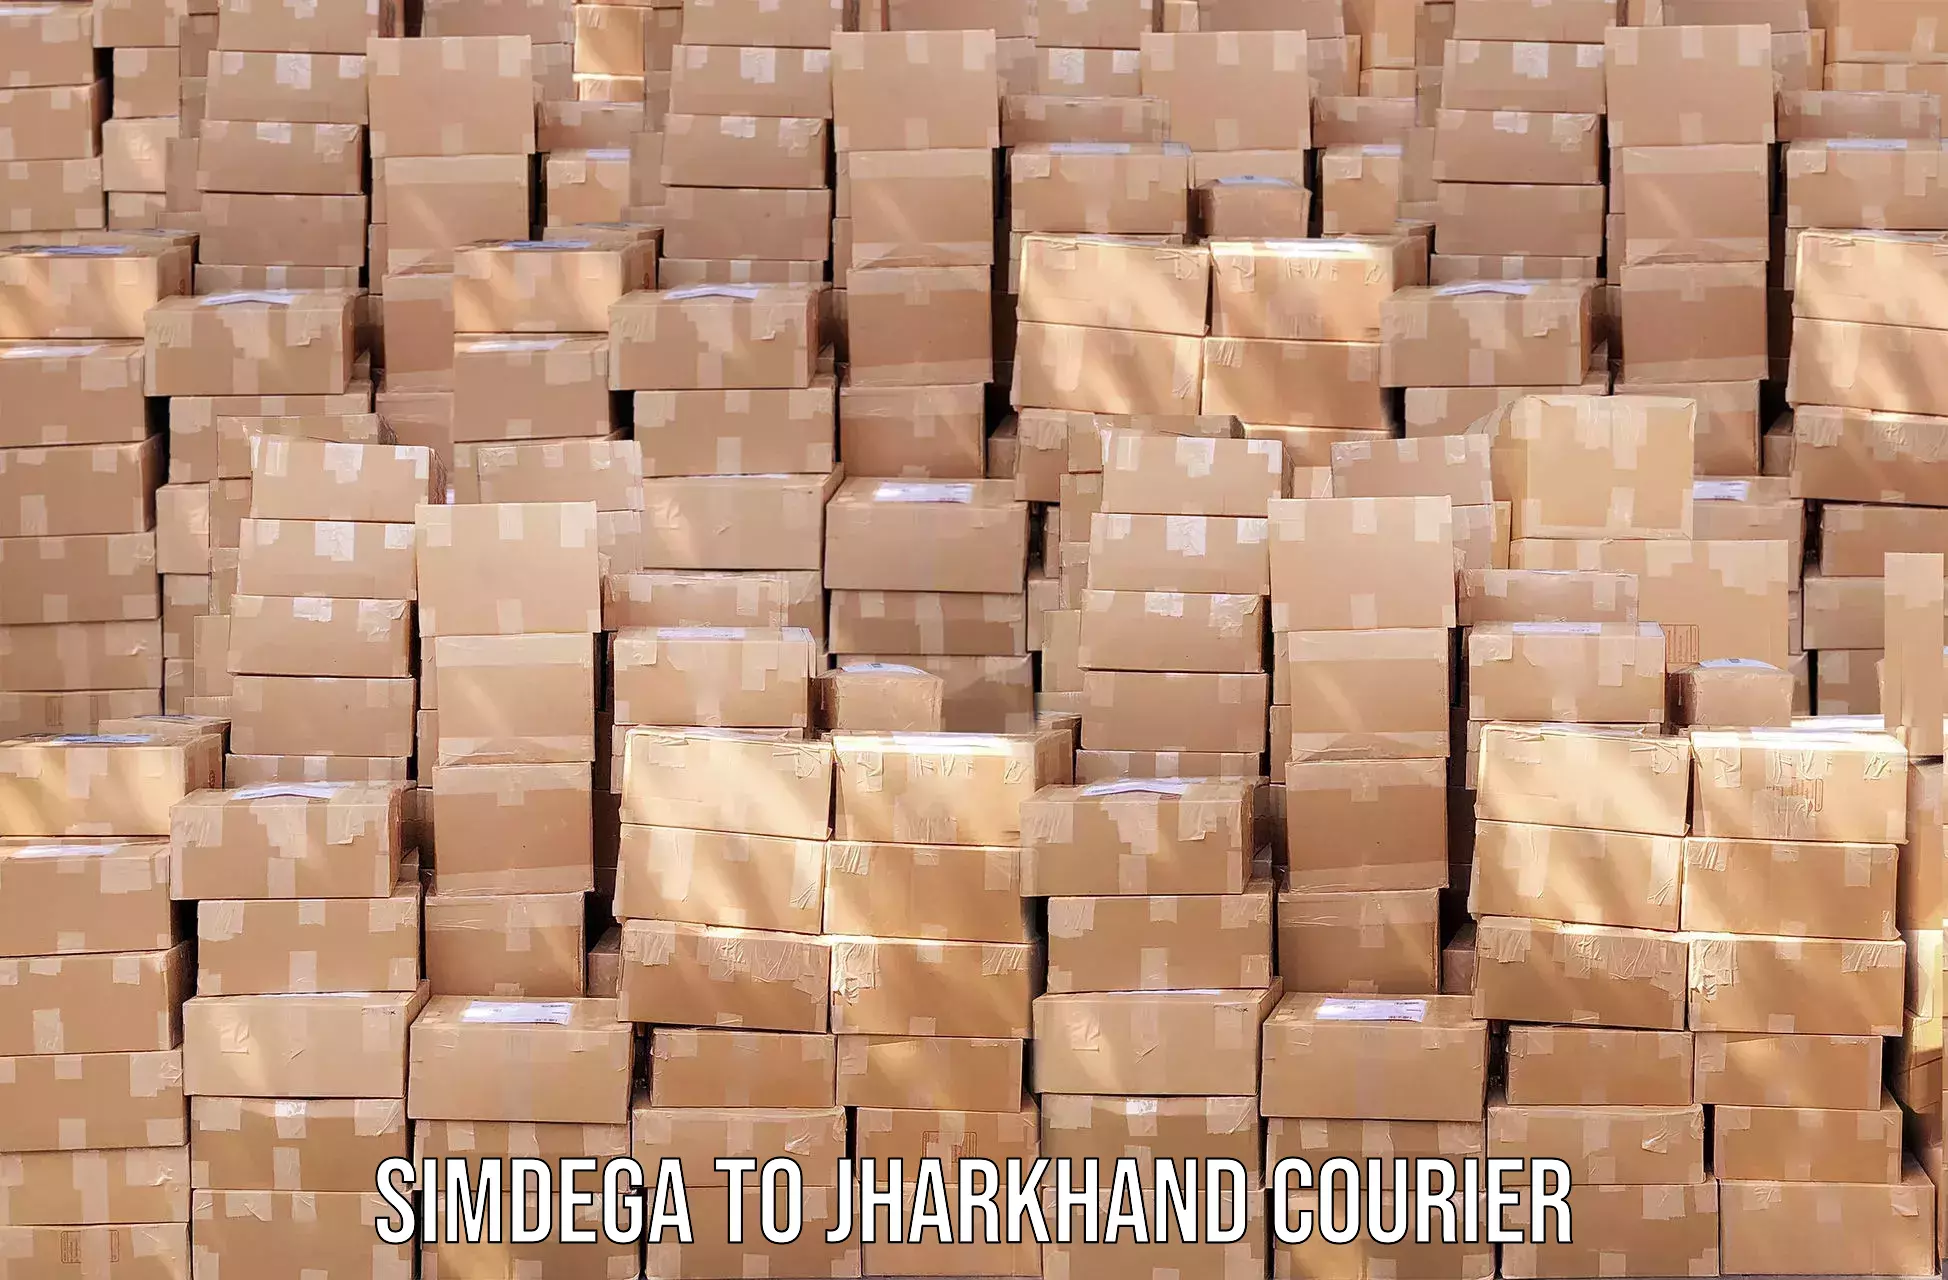 Global shipping networks in Simdega to Jharkhand